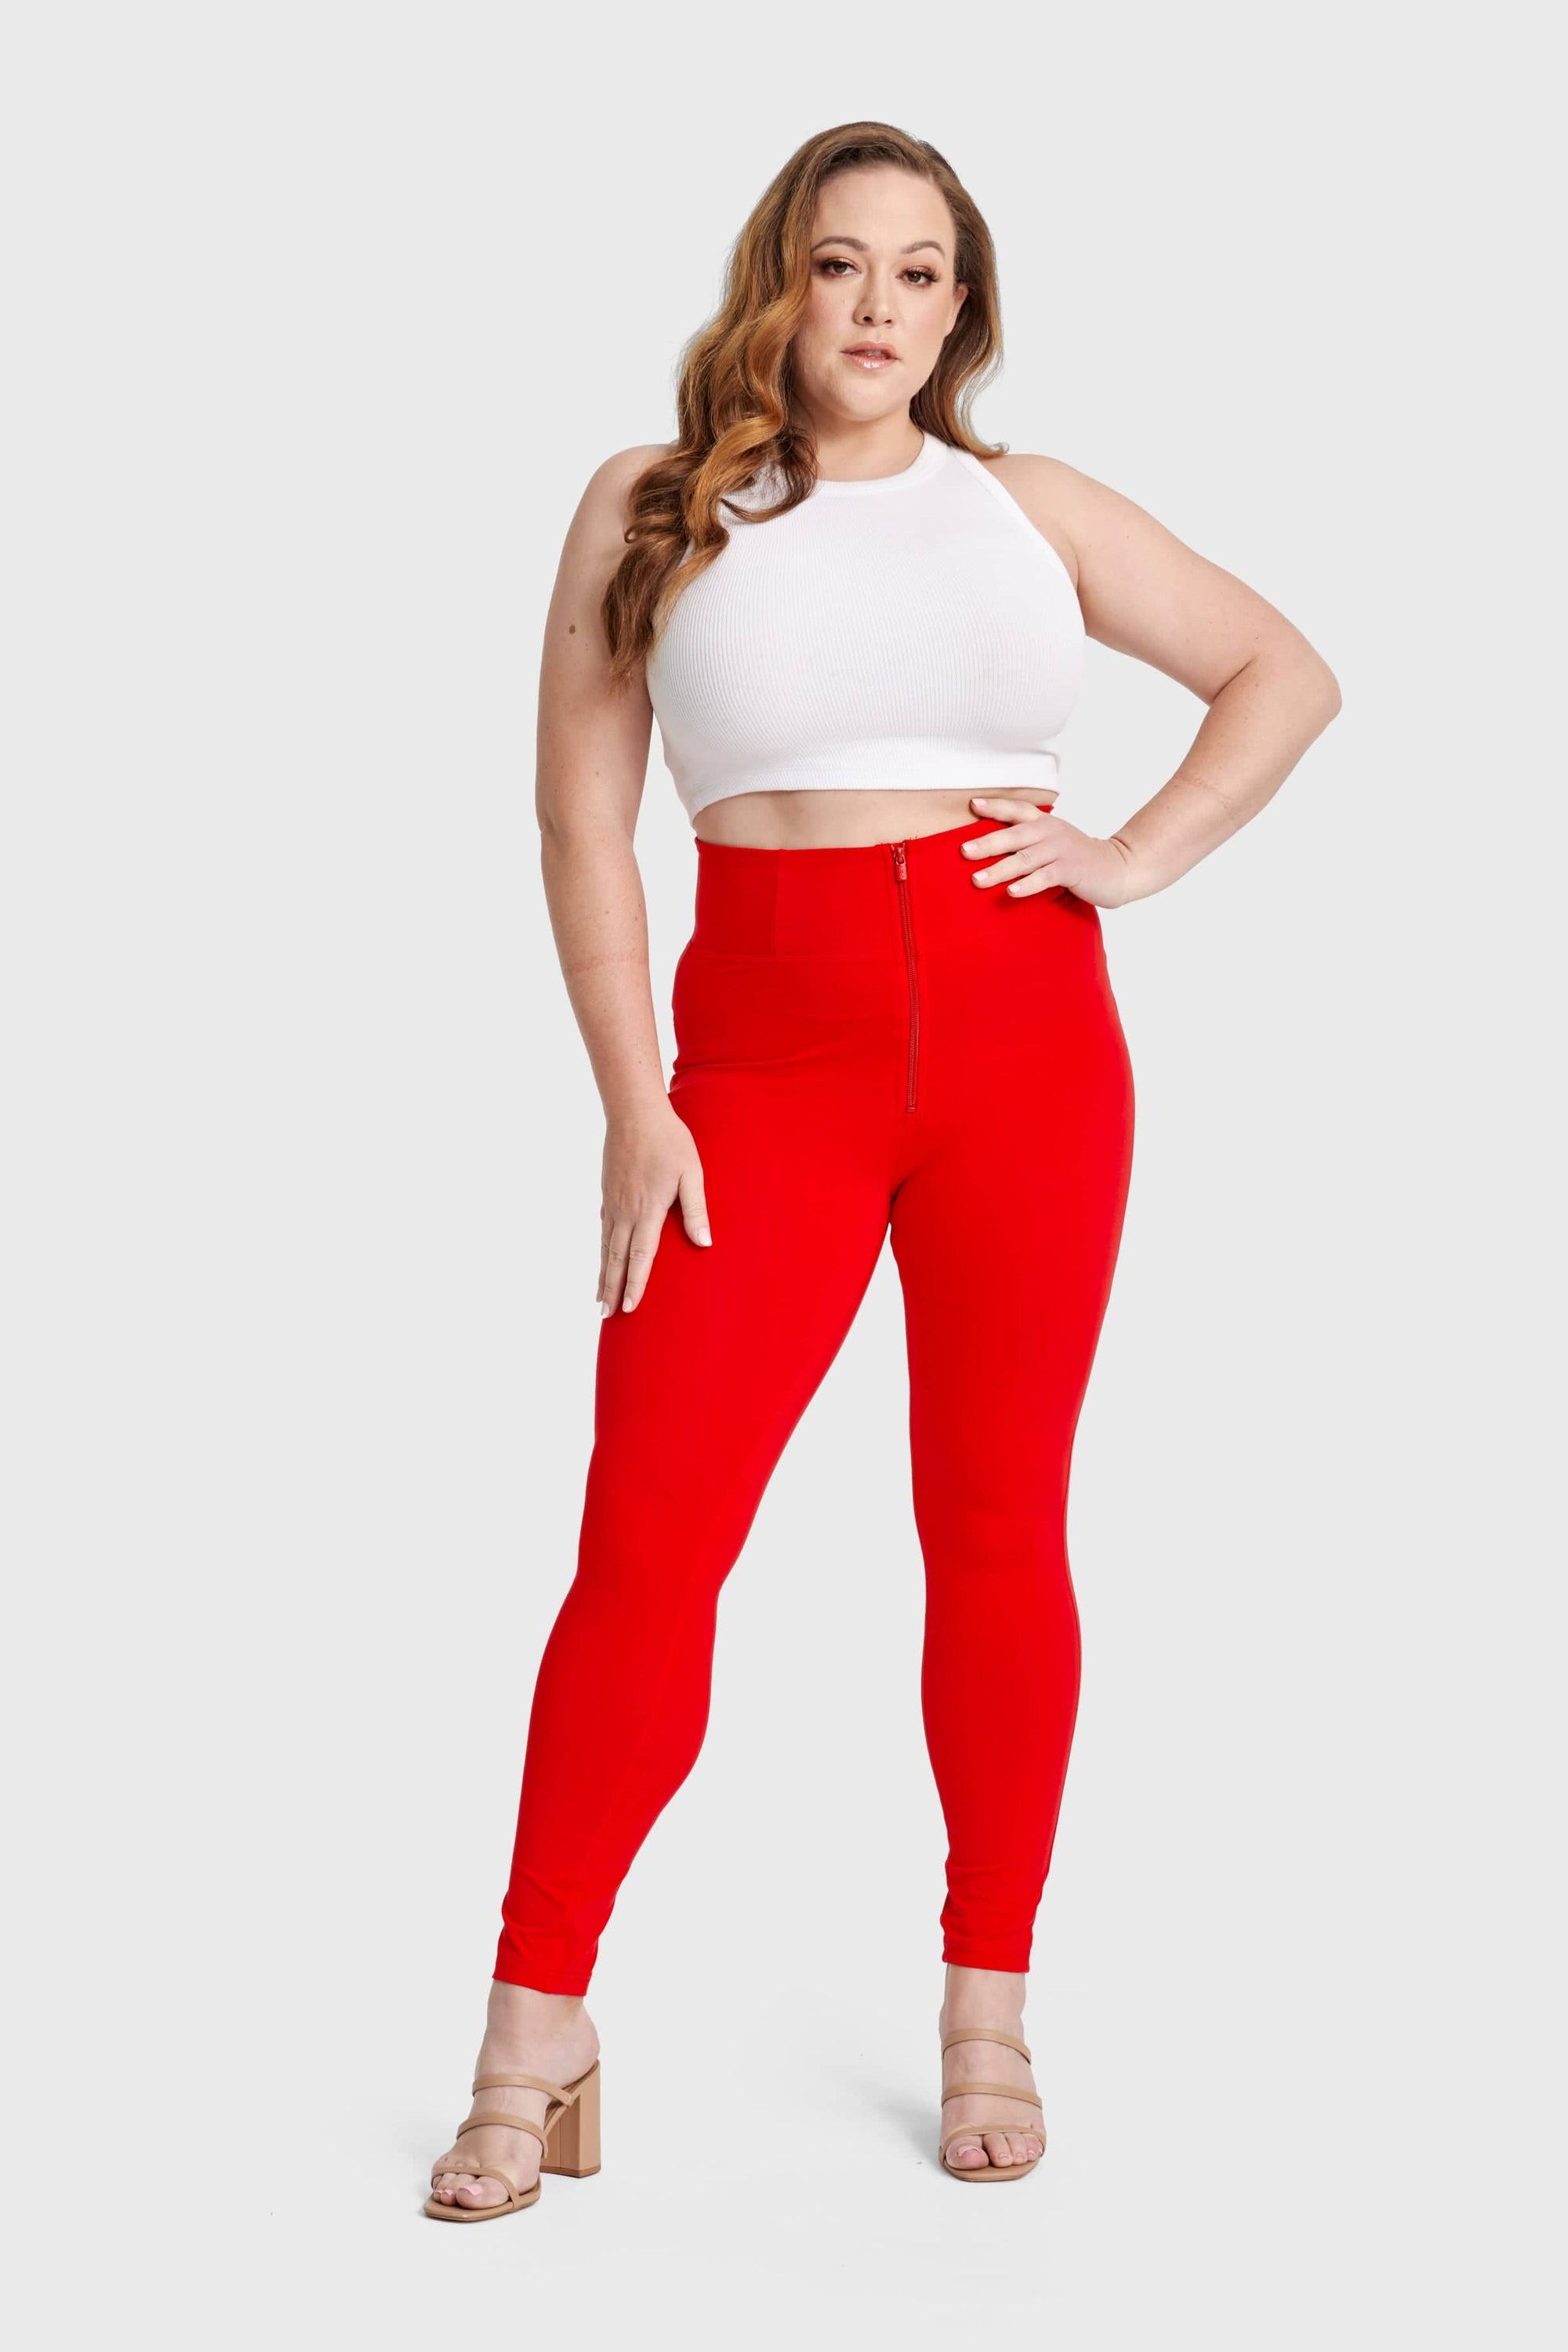 WR.UP® Curvy Fashion - Zip High Waisted - Full Length - Red 6